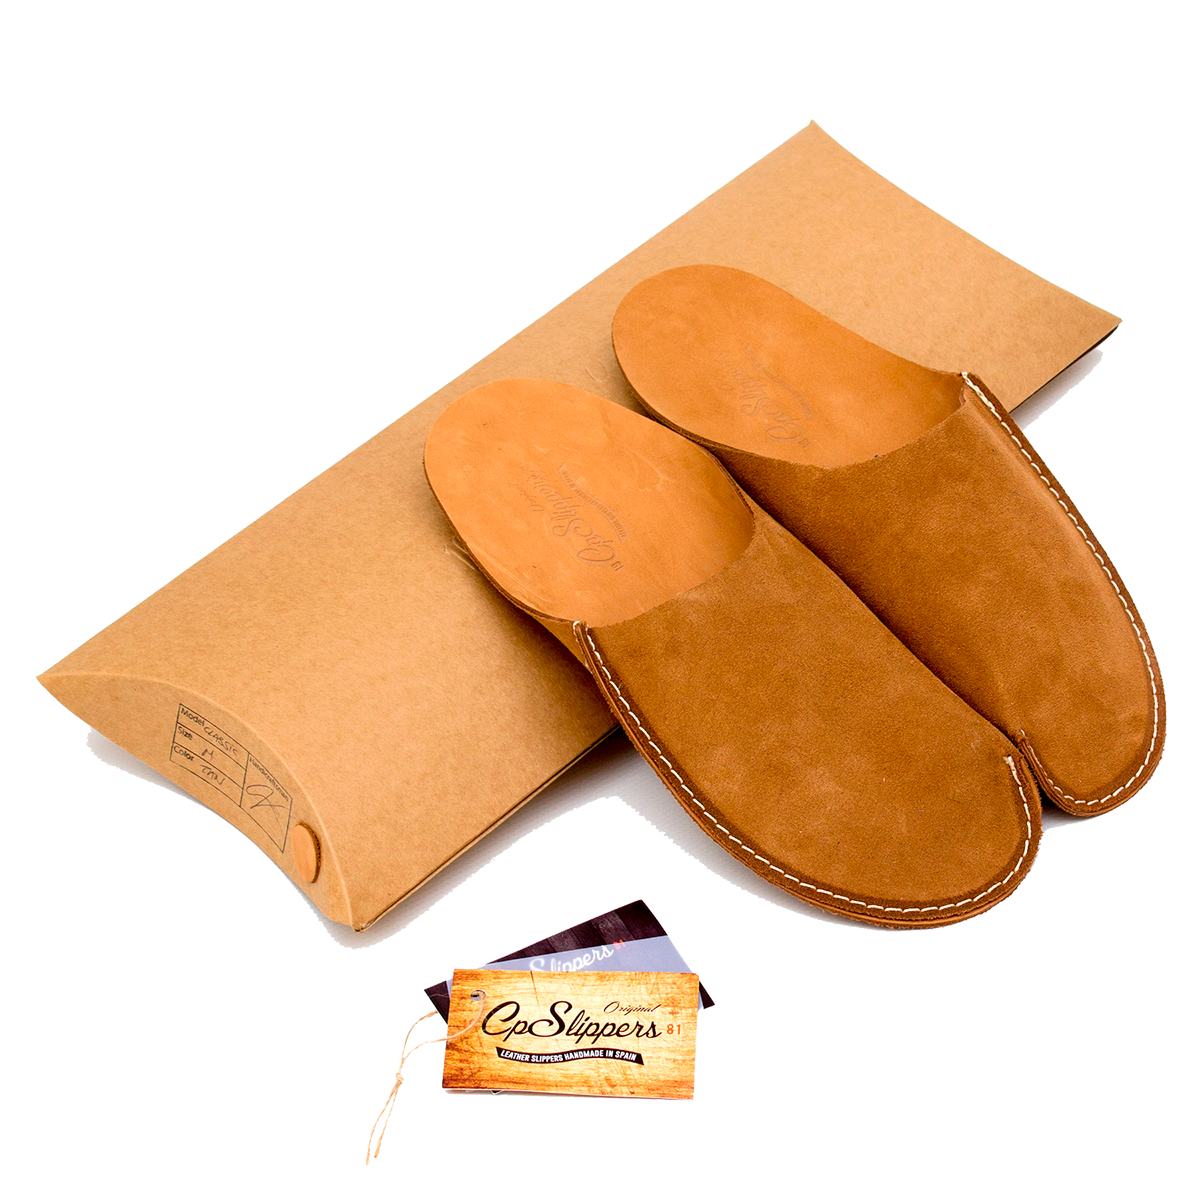 CP Slippers box